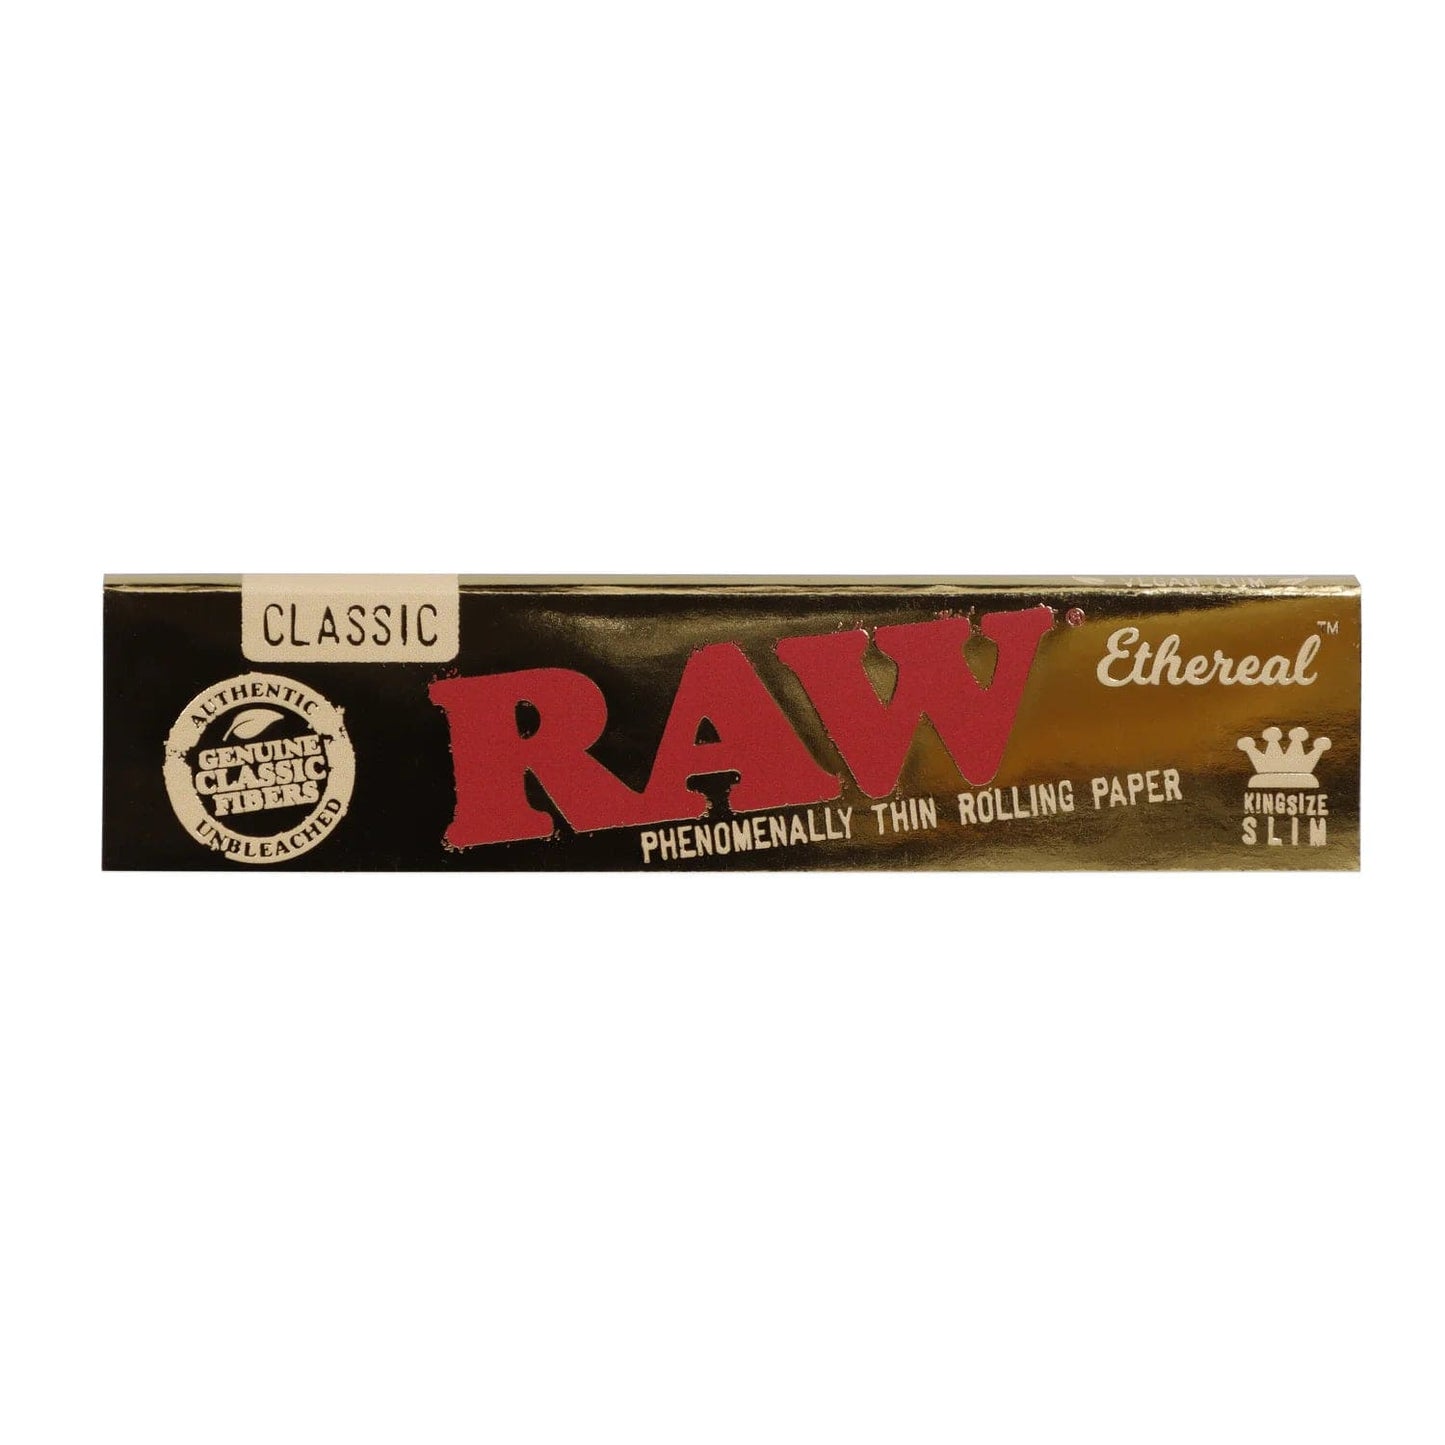 RAW Ethereal Kingsize Slim Rolling Papers